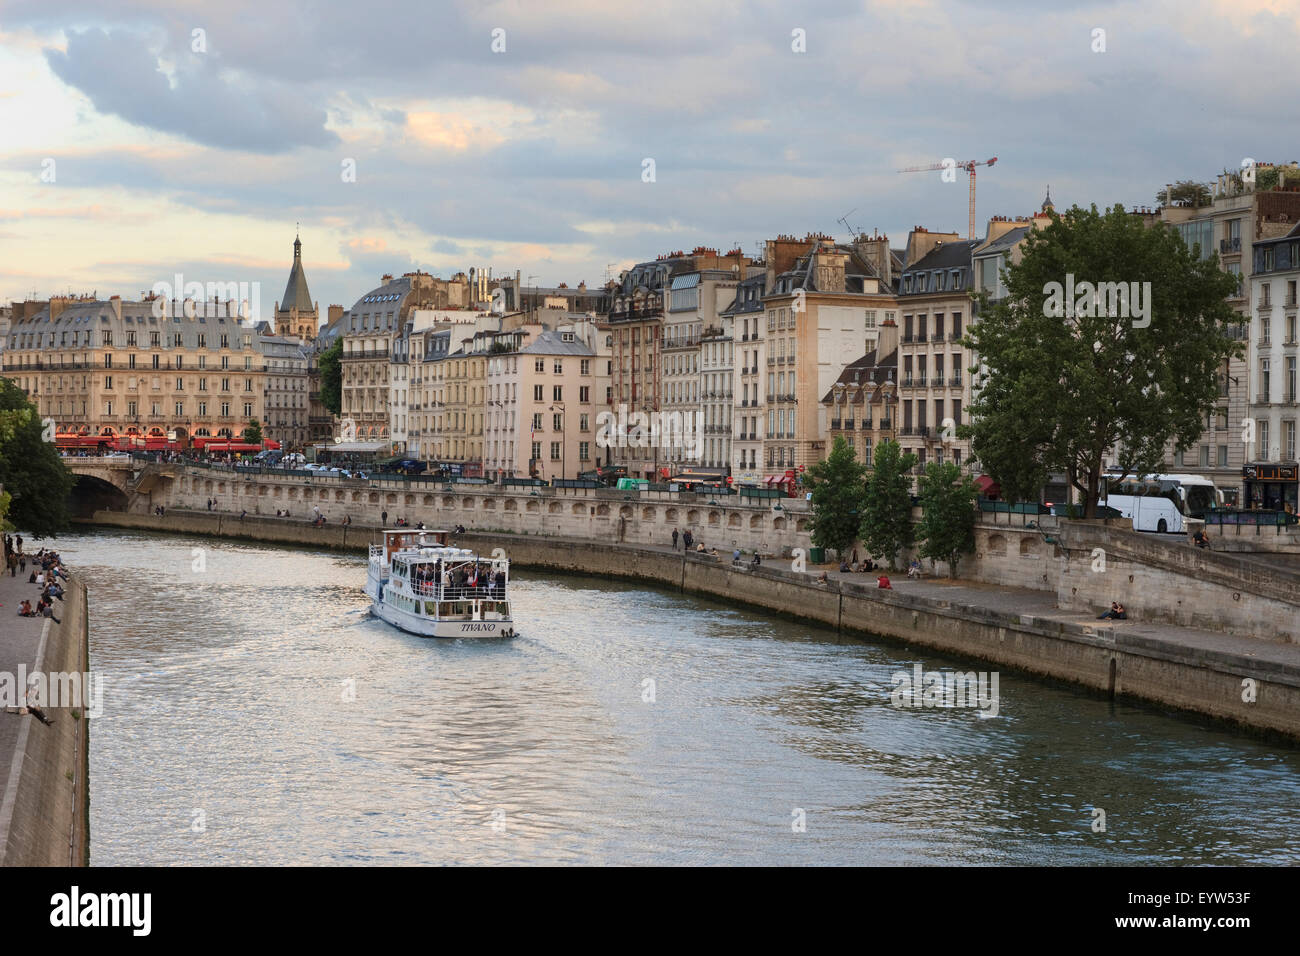 The view from Pont Neuf, looking across to the Quai des Grands Augustins in Paris, France. Stock Photo